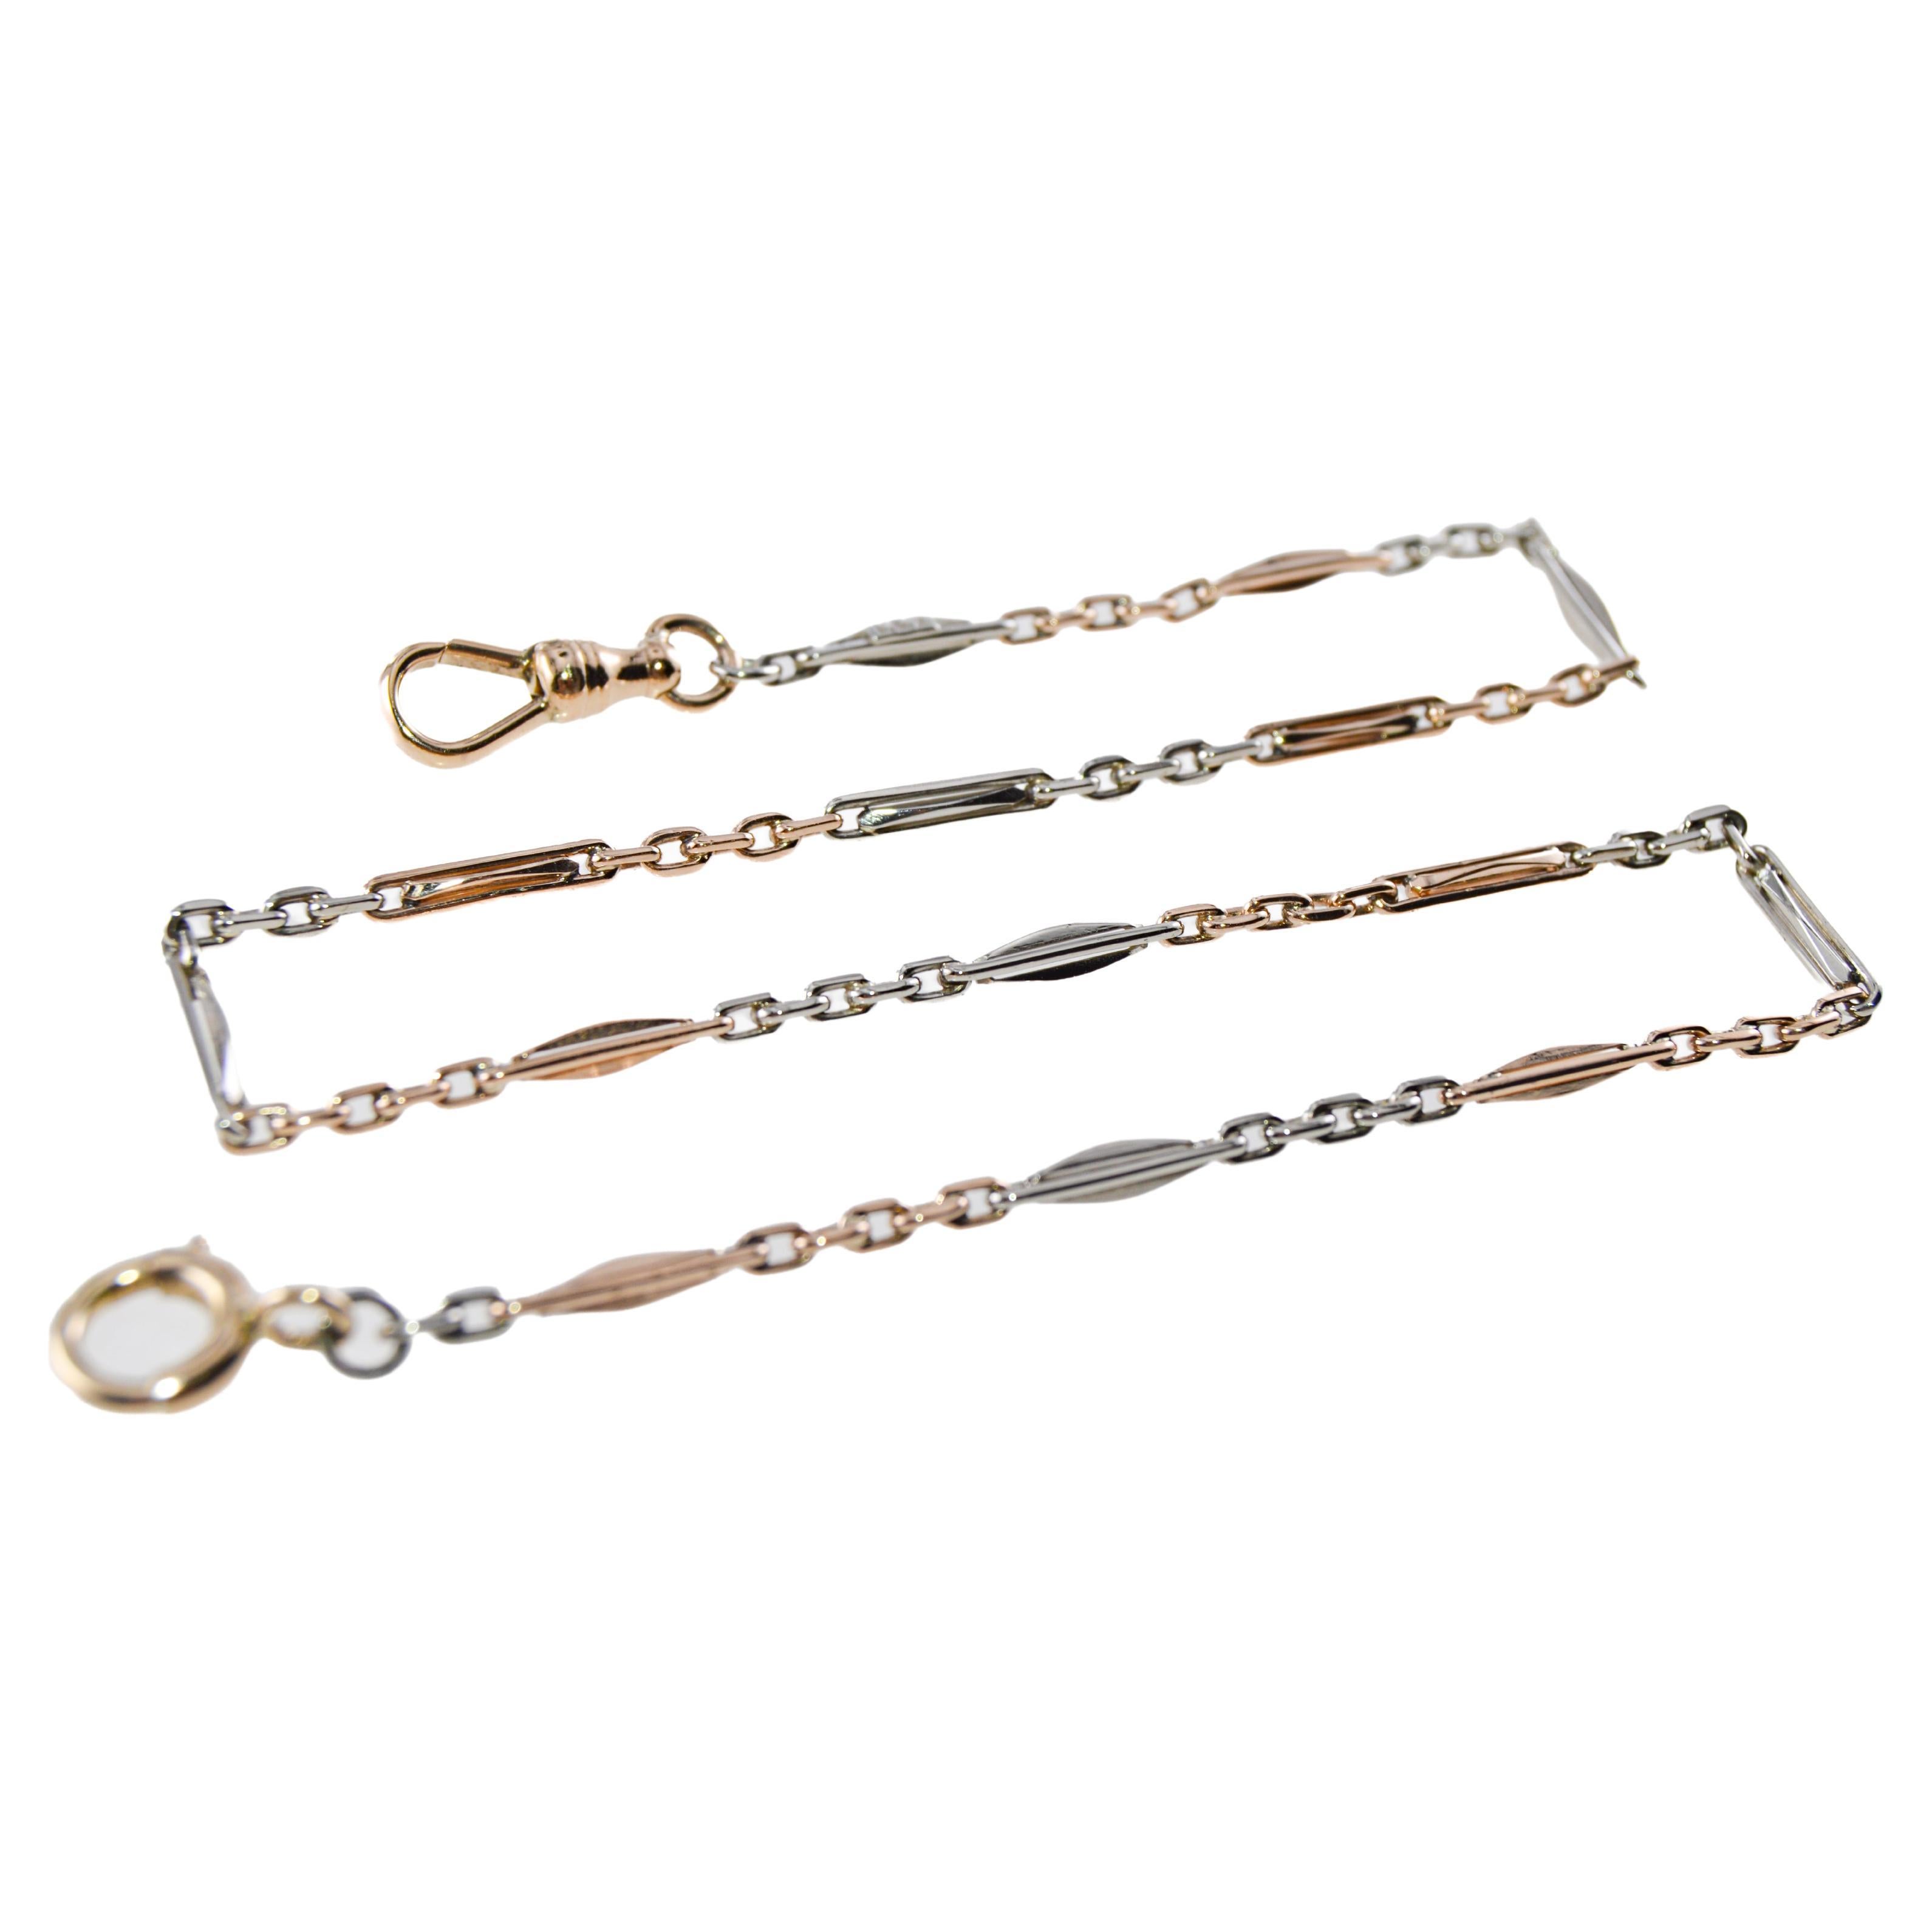 METAL / MATERIAL: Two-Tone 14Kt Pink & White Gold
CIRCA / YEAR: 1920's / 30's
ATTACHMENT / LENGTH: 15 Inches in Length

This is a great looking hand made necklace or bracelet, pocket watch chain. Each link is hand constructed and the workmanship is